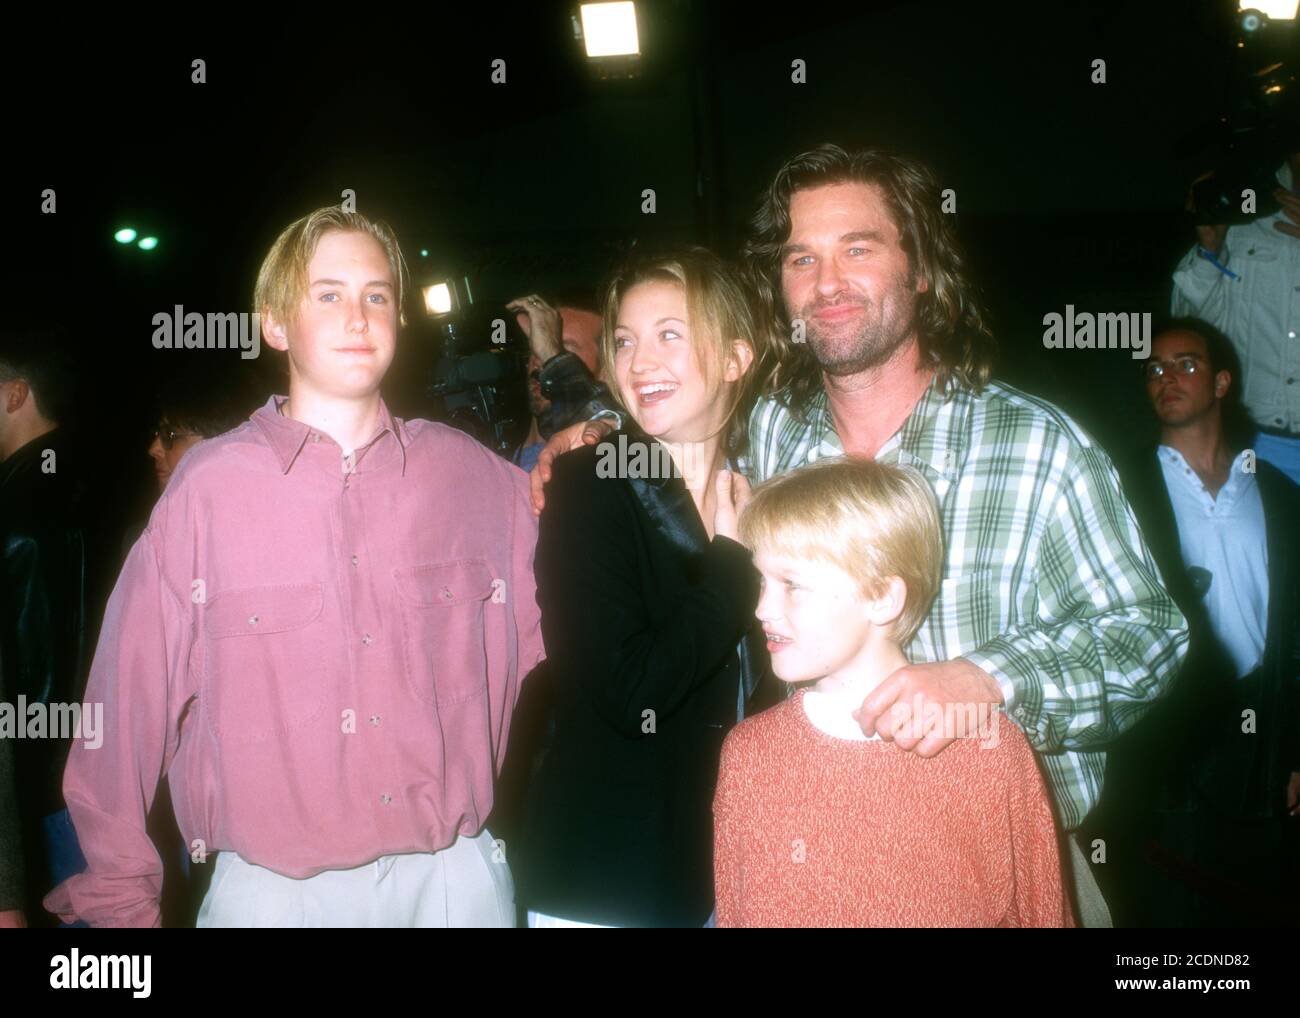 Westwood, California, USA 11th March (L-R) Boston Russell, Actress Kate Hudson, actor Kurt Russell and son Russell attend Warner Bros. Pictures' 'Executive Decision' Premiere on March 11, 1996 Mann